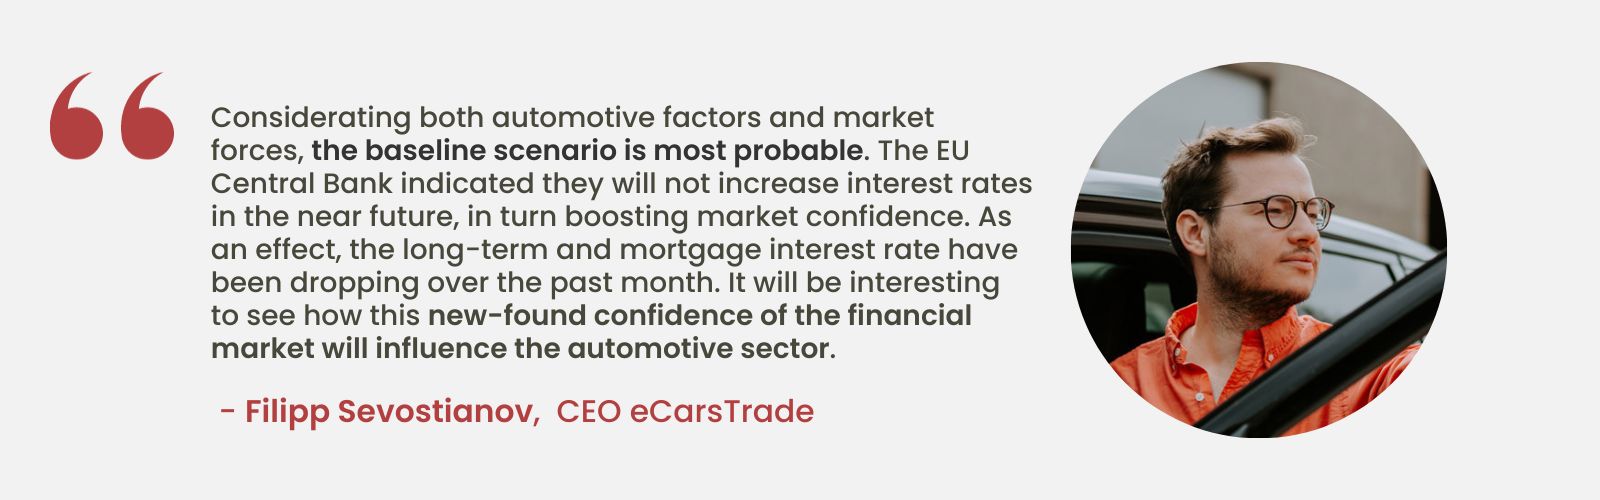 Expert analysis by Filipp Sevostianov, CEO of eCarsTrade, discussing the impact of stable EU interest rates on market confidence and the potential effects on the automotive industry.